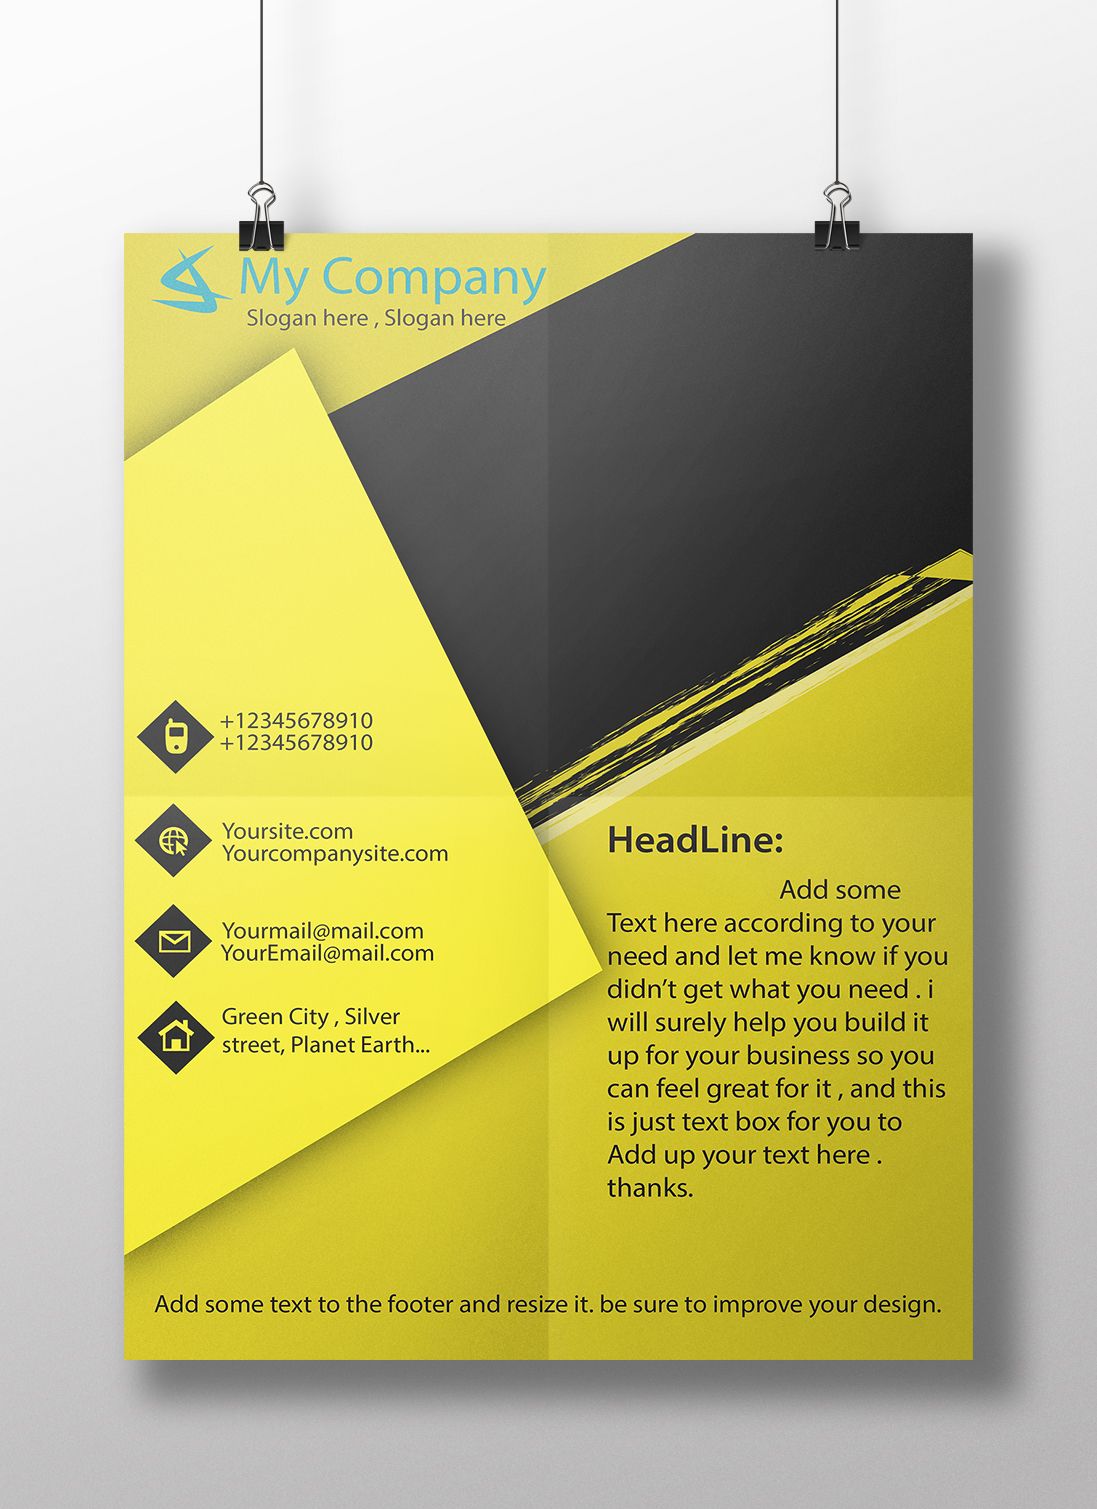 app Royalty free flyer 2 without clipping.jpg